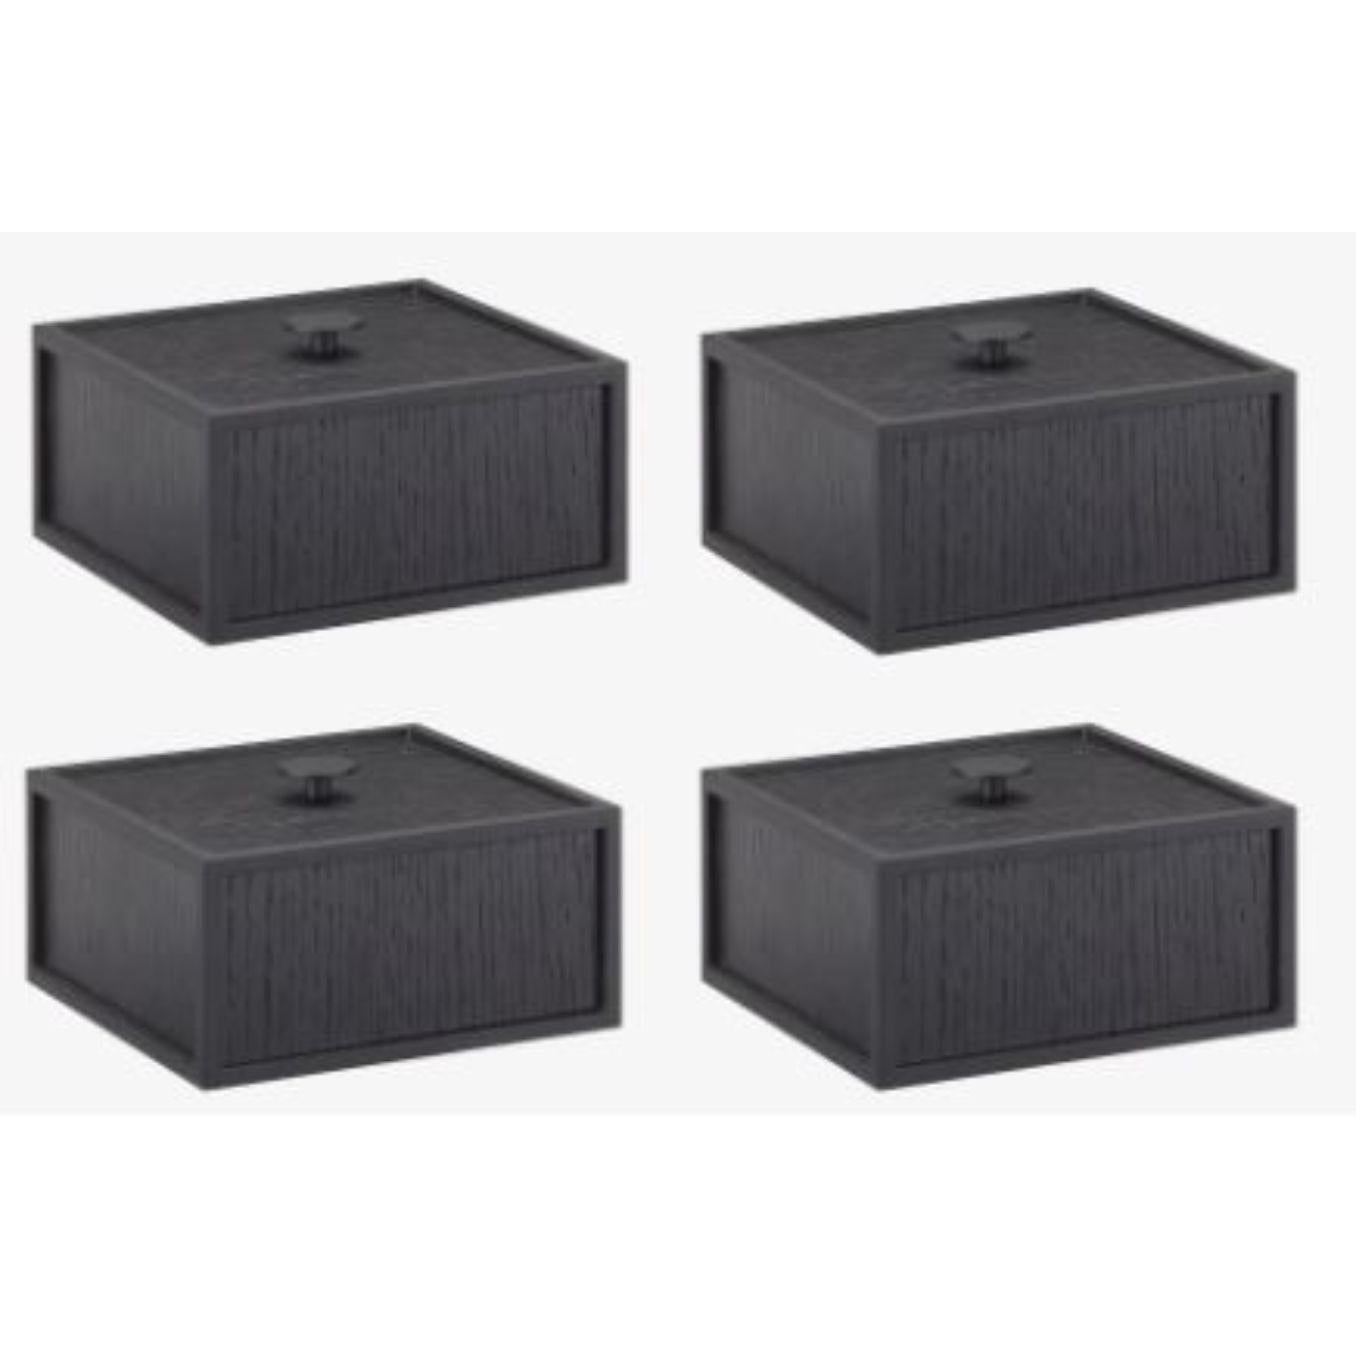 Set of 4 black ash frame 14 box by Lassen
Dimensions: D 10 x W 10 x H 7 cm 
Materials: Finér, Melamin, Melamine, Metal, Veneer
Weight: 1.10 Kg

Frame Box is a square box in a cubistic shape. The simple boxes are inspired by the Kubus